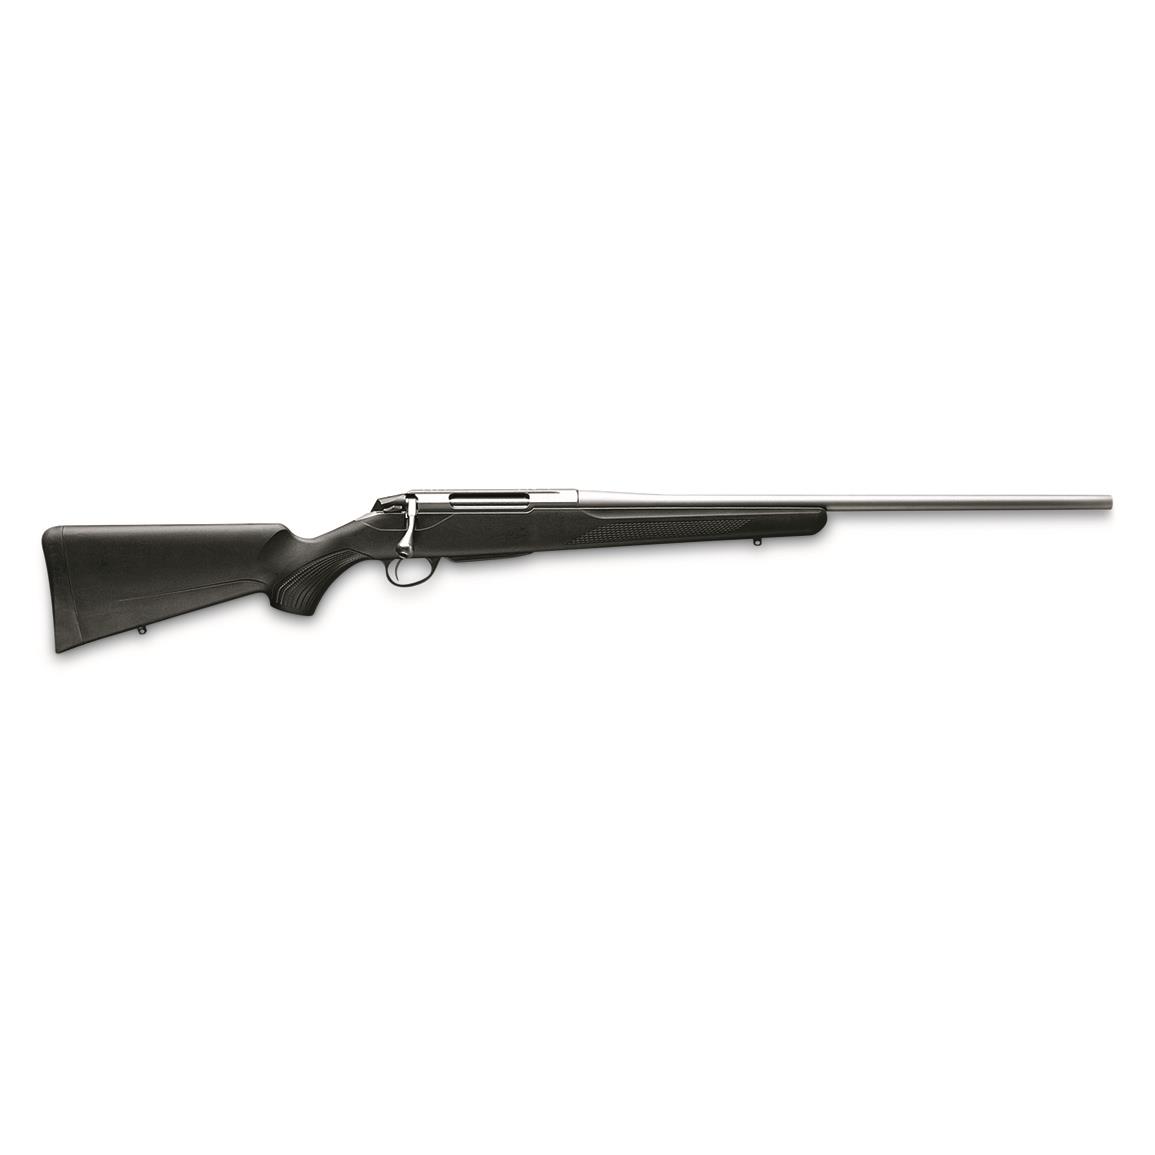 Tikka T3x Lite Stainless, Bolt Action, .22-250 Remington, 22.4" Stainless Steel Barrel, 3+1 Rounds